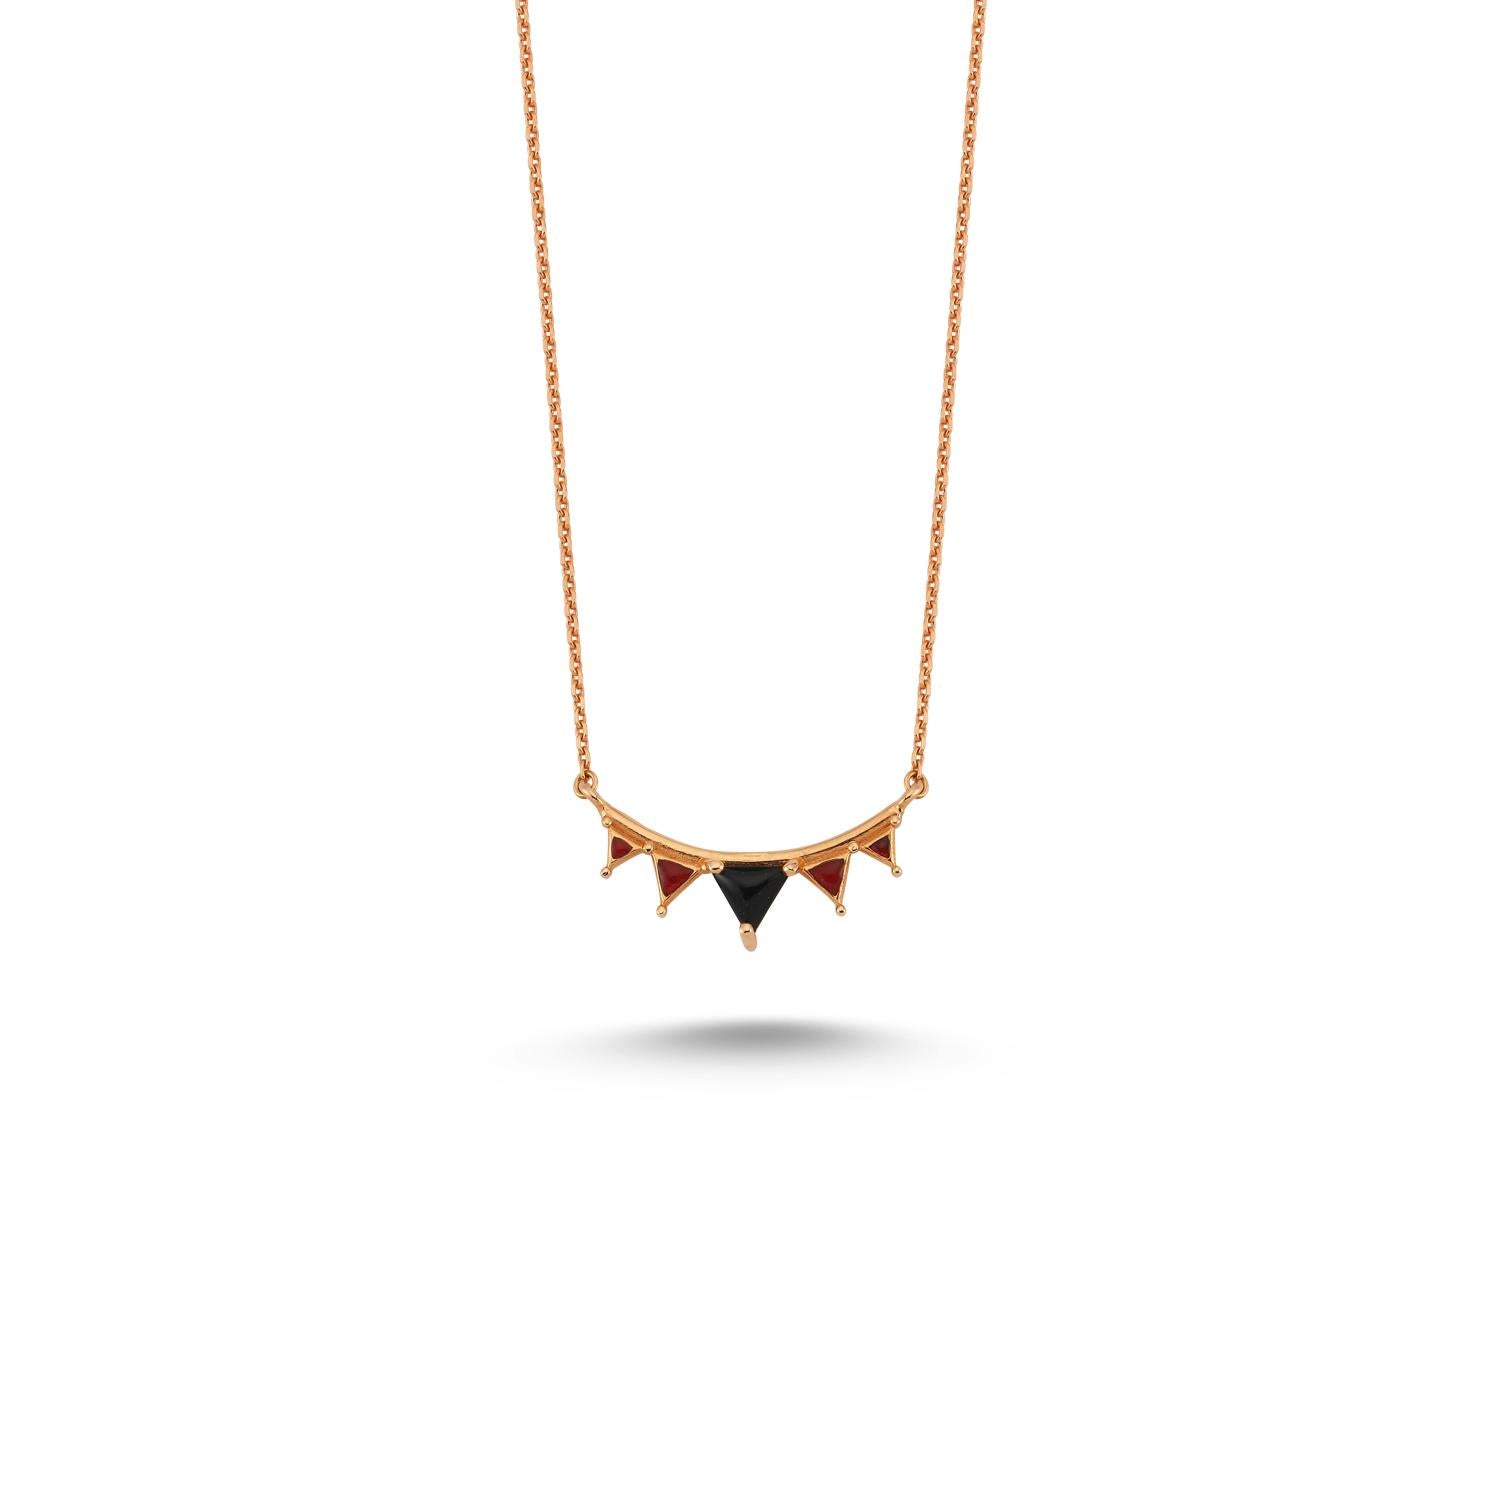 Catch you necklace with red enamel & onyx in 14k rose gold by Selda Jewellery

Additional Information:-
Collection: Dragon lady collection
14K Rose gold
Chain length 46cm